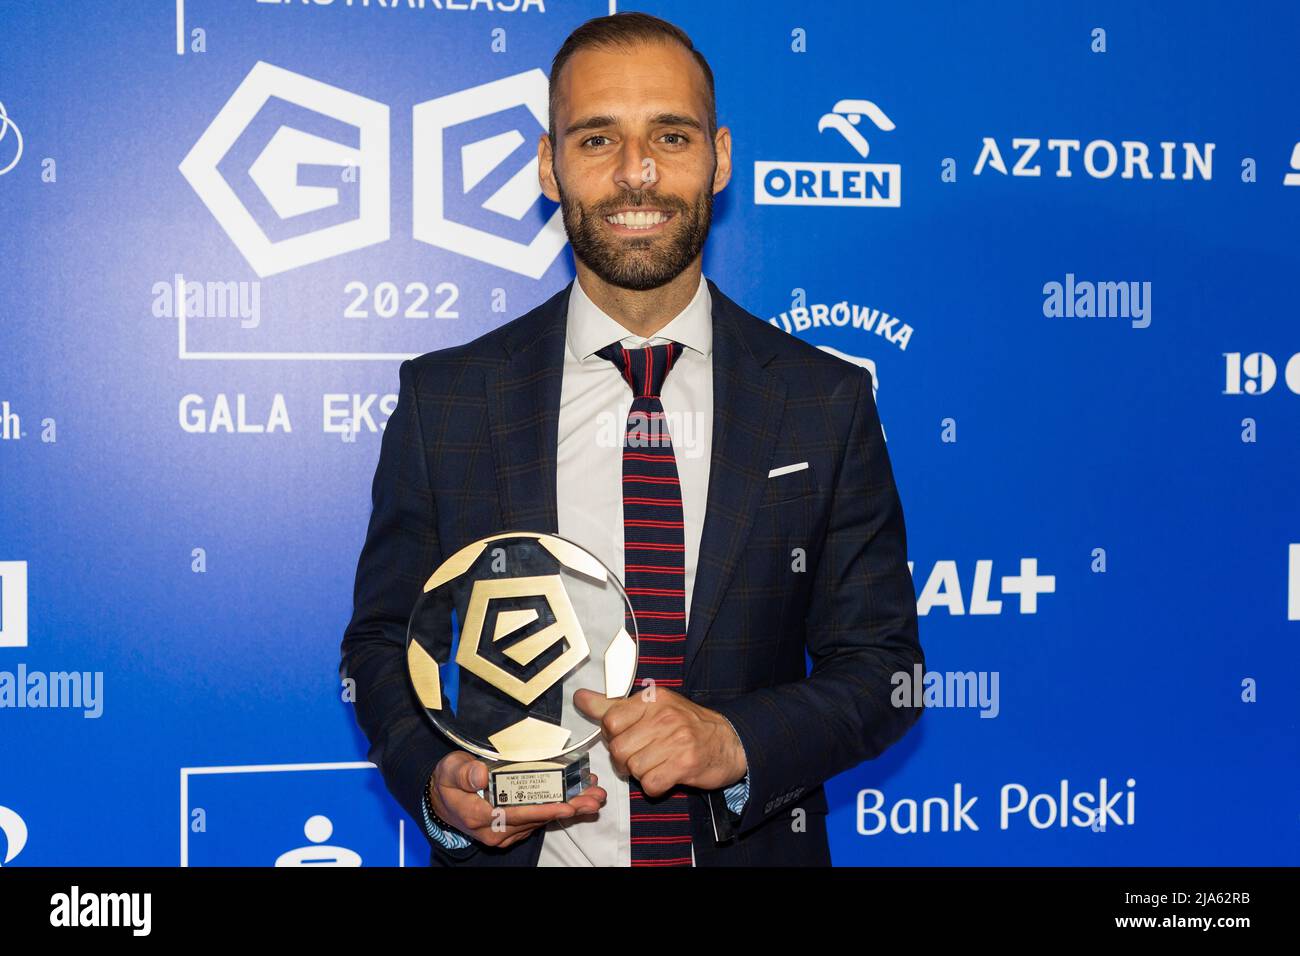 Flavio Paixao of Lechia Gdansk with award for the Number of the season 2021/22 seen during Gala of Ekstraklasa 2022 in Warsaw. (Photo by Mikolaj Barbanell / SOPA Images/Sipa USA) Stock Photo